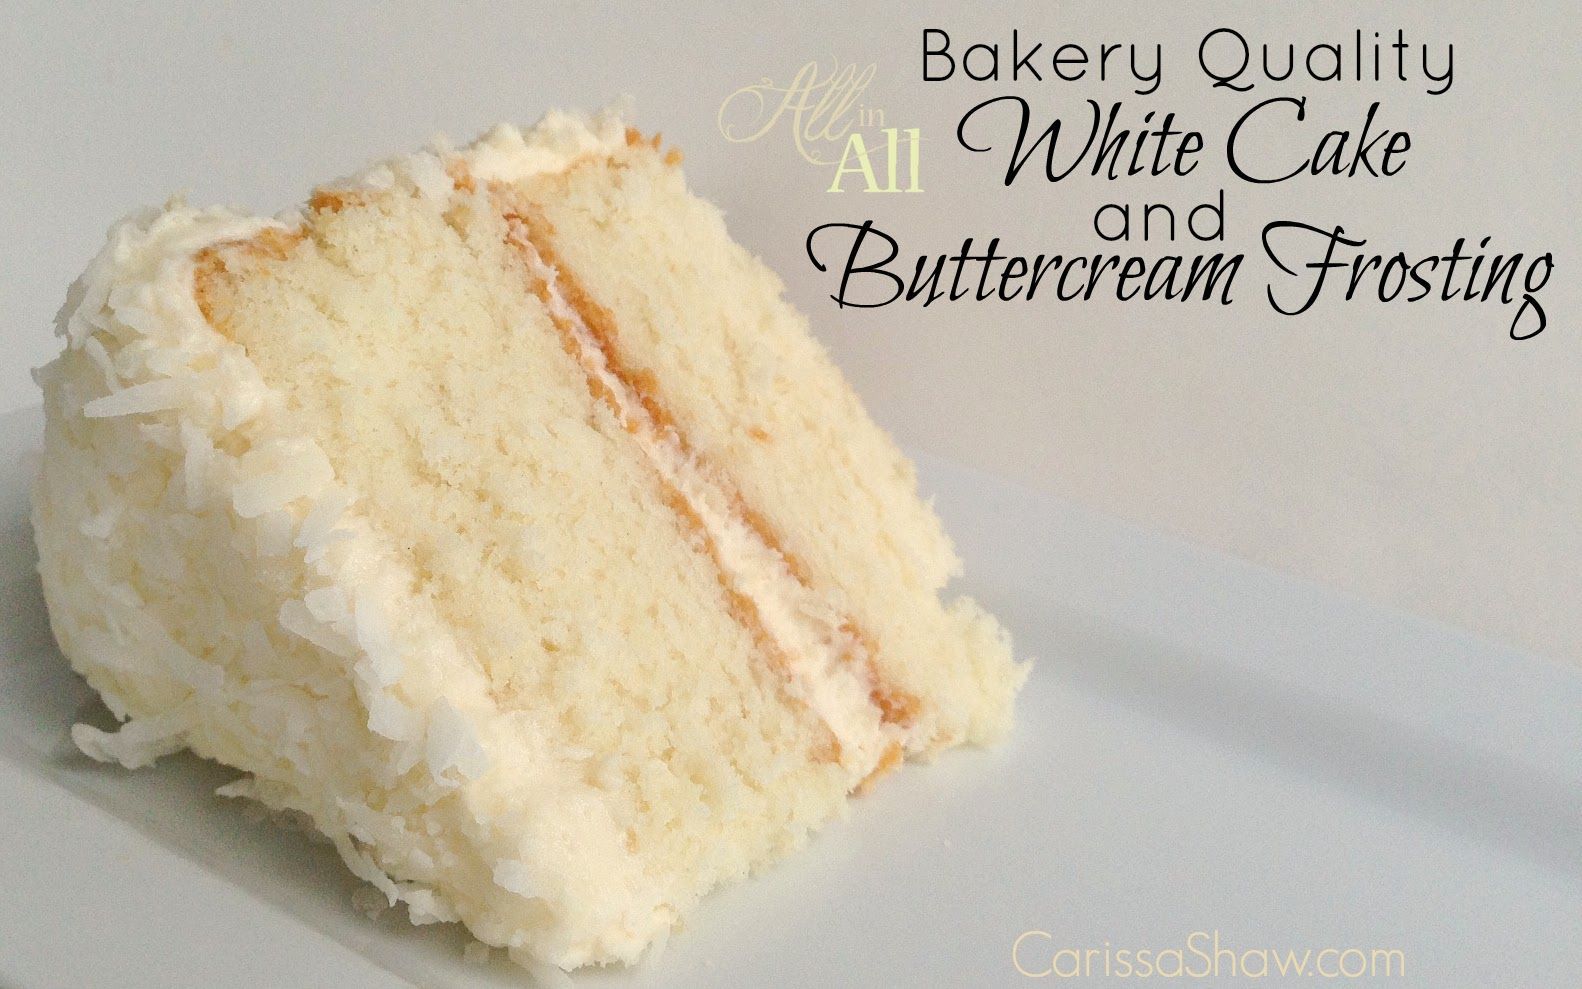 How to make a wonderful white cake with buttercream frosting that tastes like it came from a bakery!